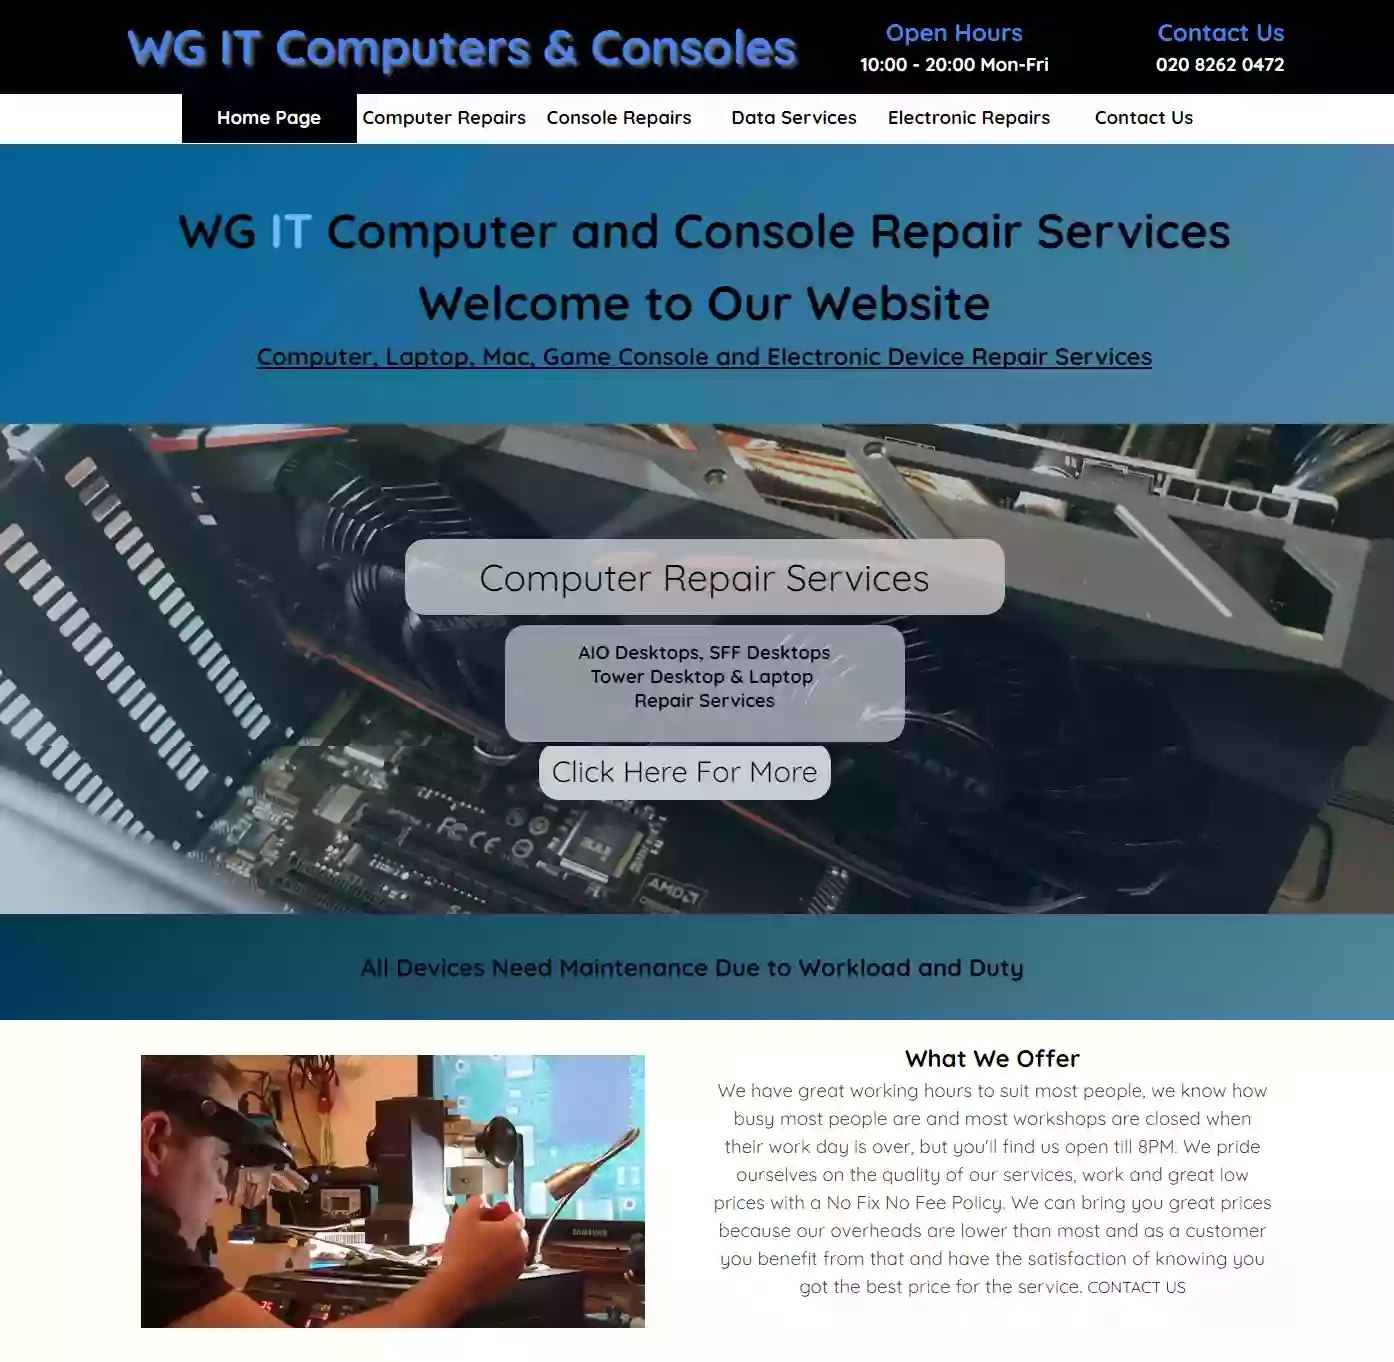 WG IT Computer & Console Repair Services